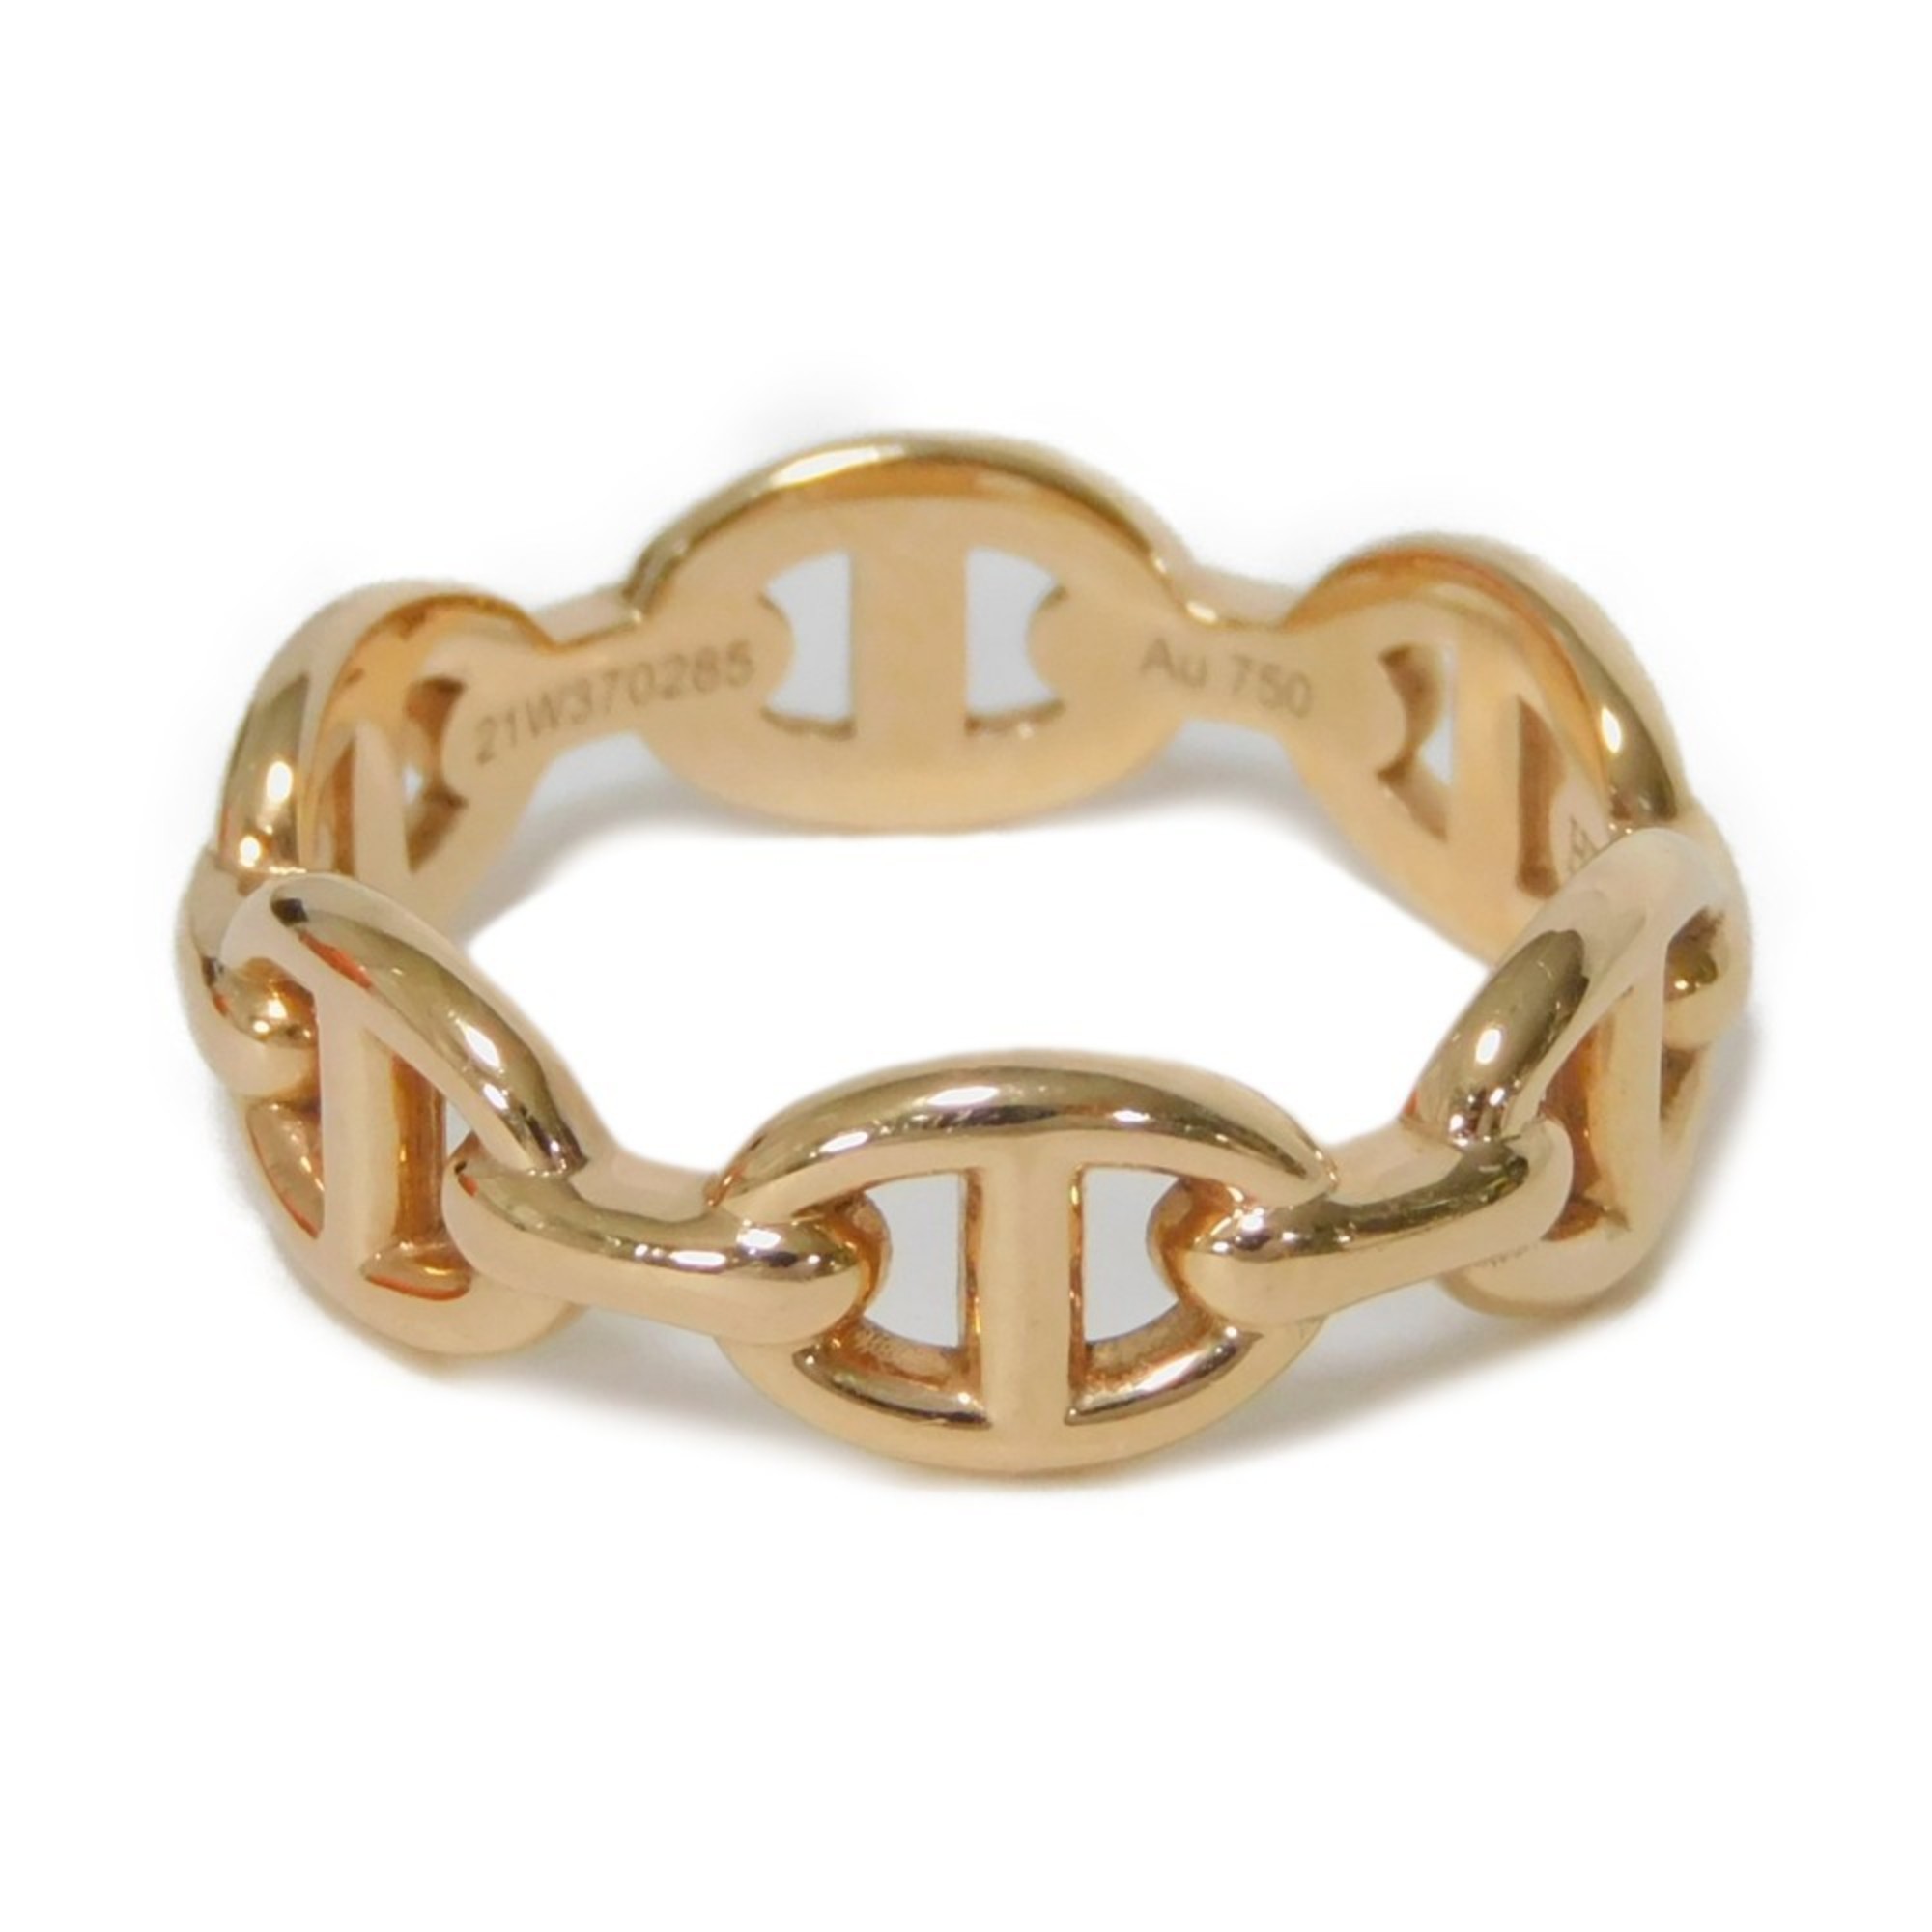 Hermes HERMES Ring Chaine d'Ancre Anchaîne PM 50 Rose Gold Anchor Chain K18PG Size 10 Au750 Pink Women's